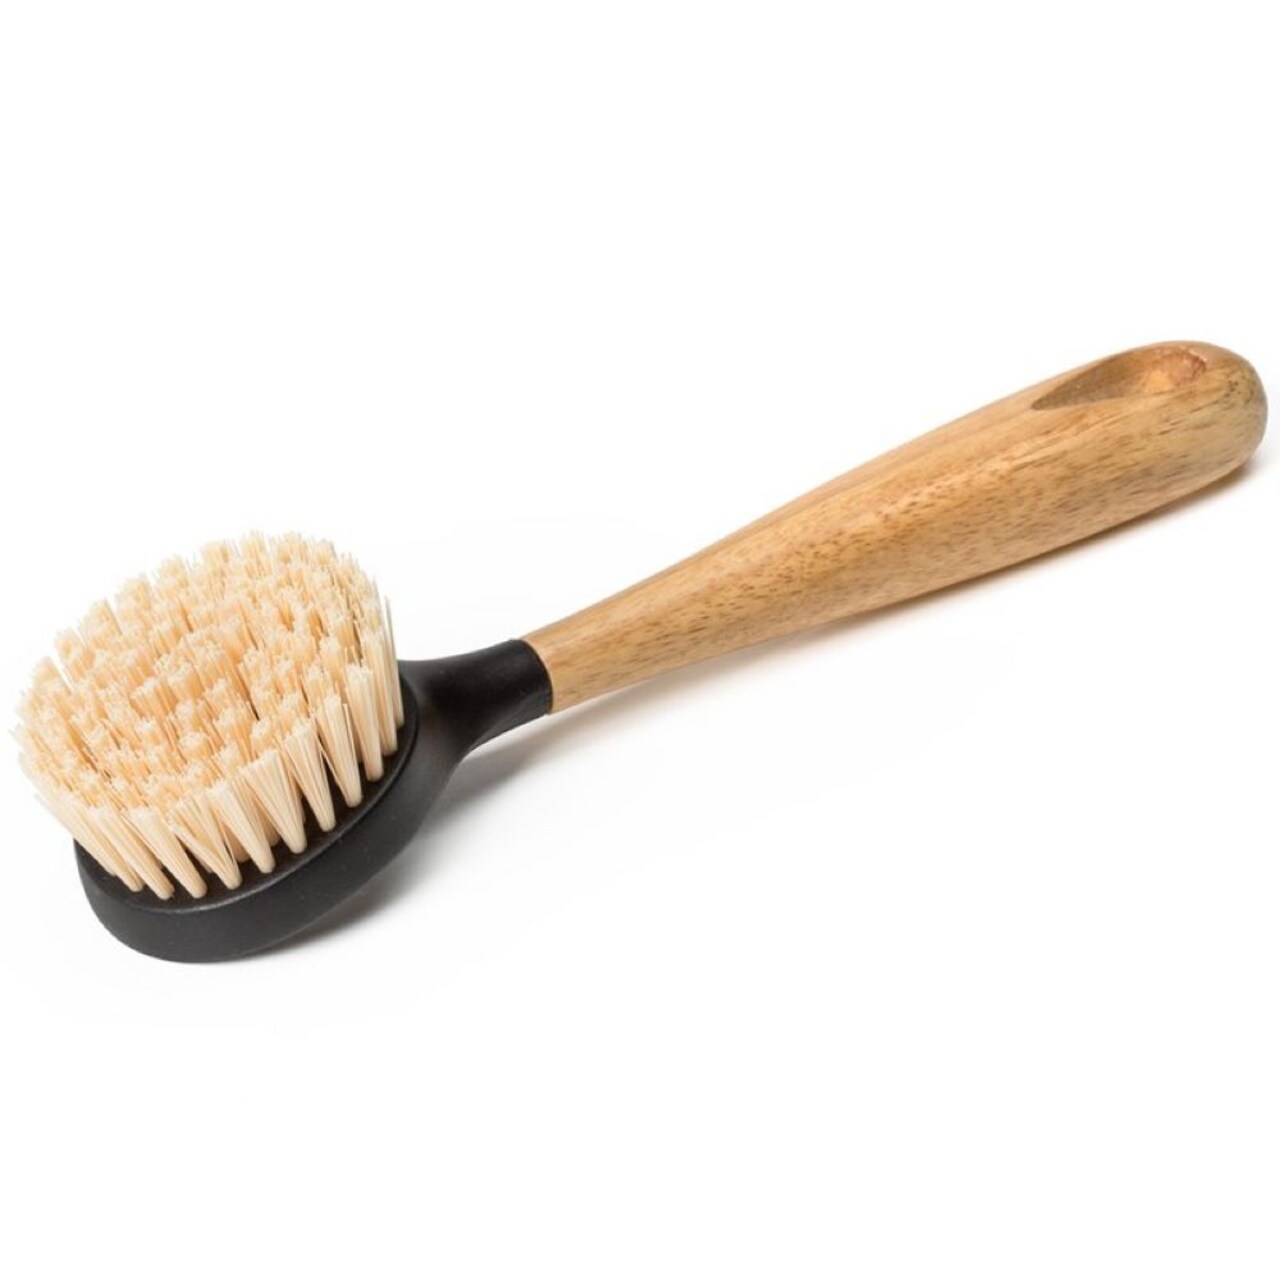 Lodge Durable and Comfortable Nylon Scrubbing Brush for Cast Iron